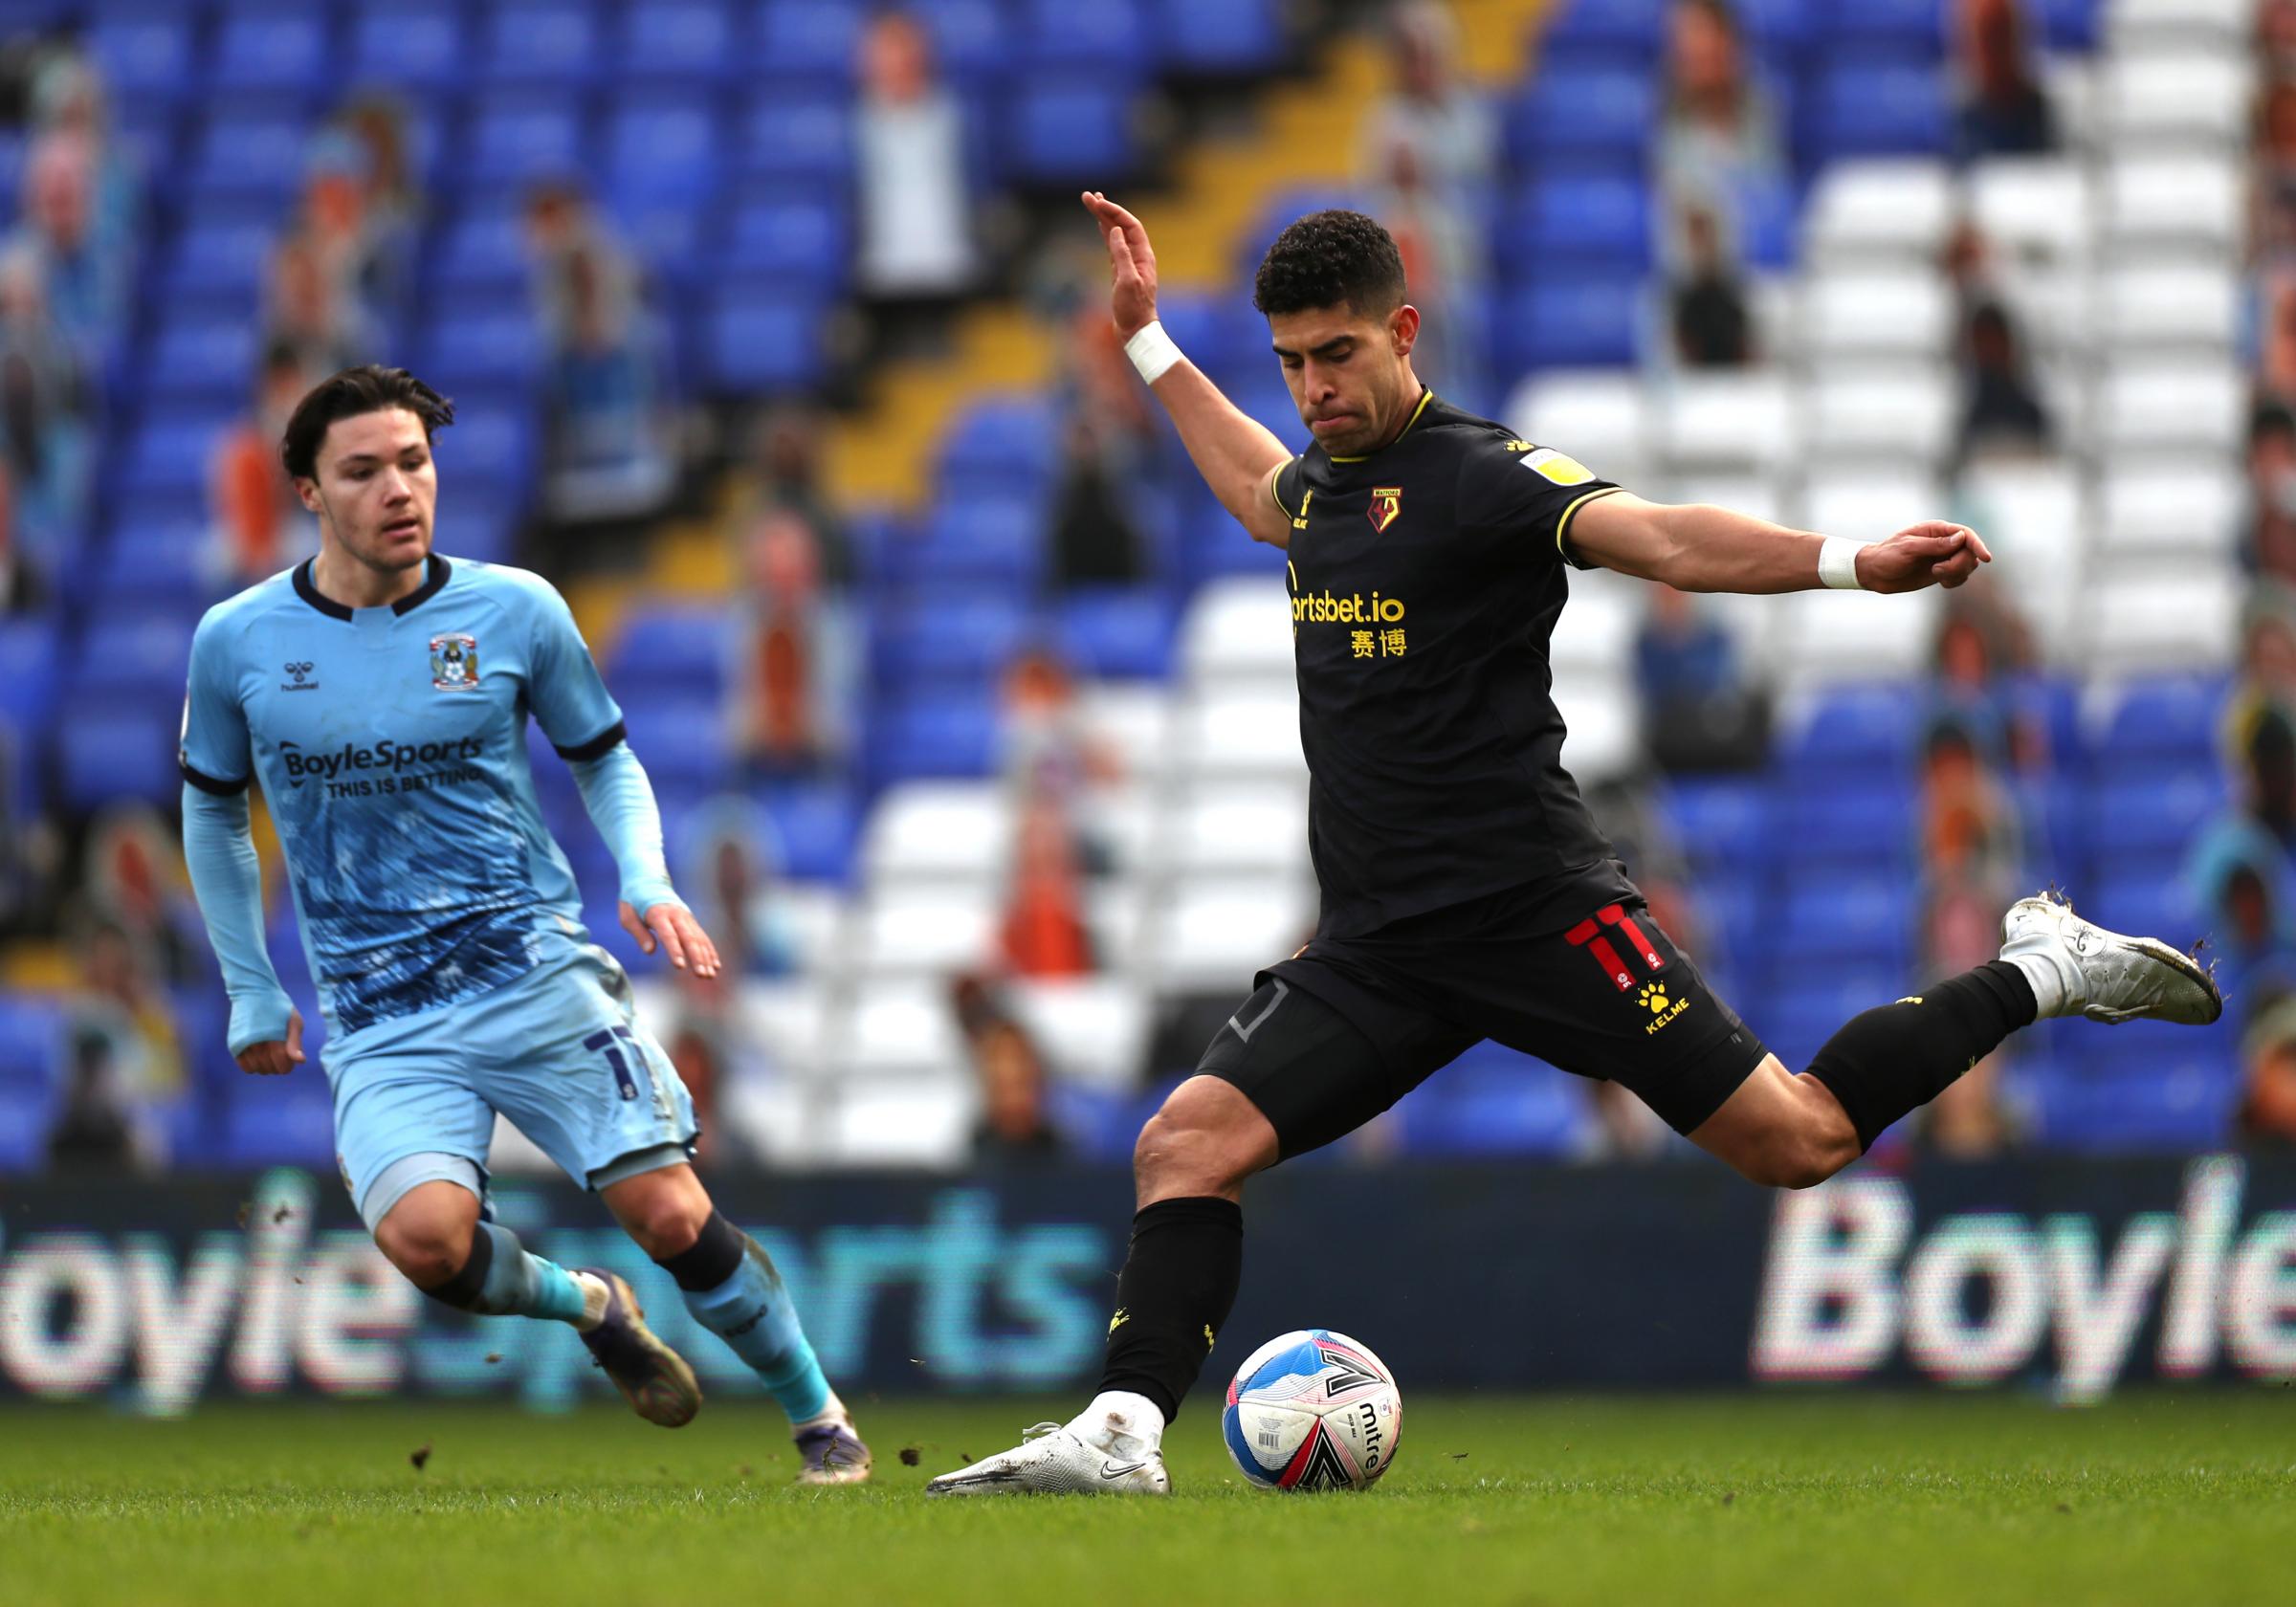 Watford and Coventry play out goalless draw